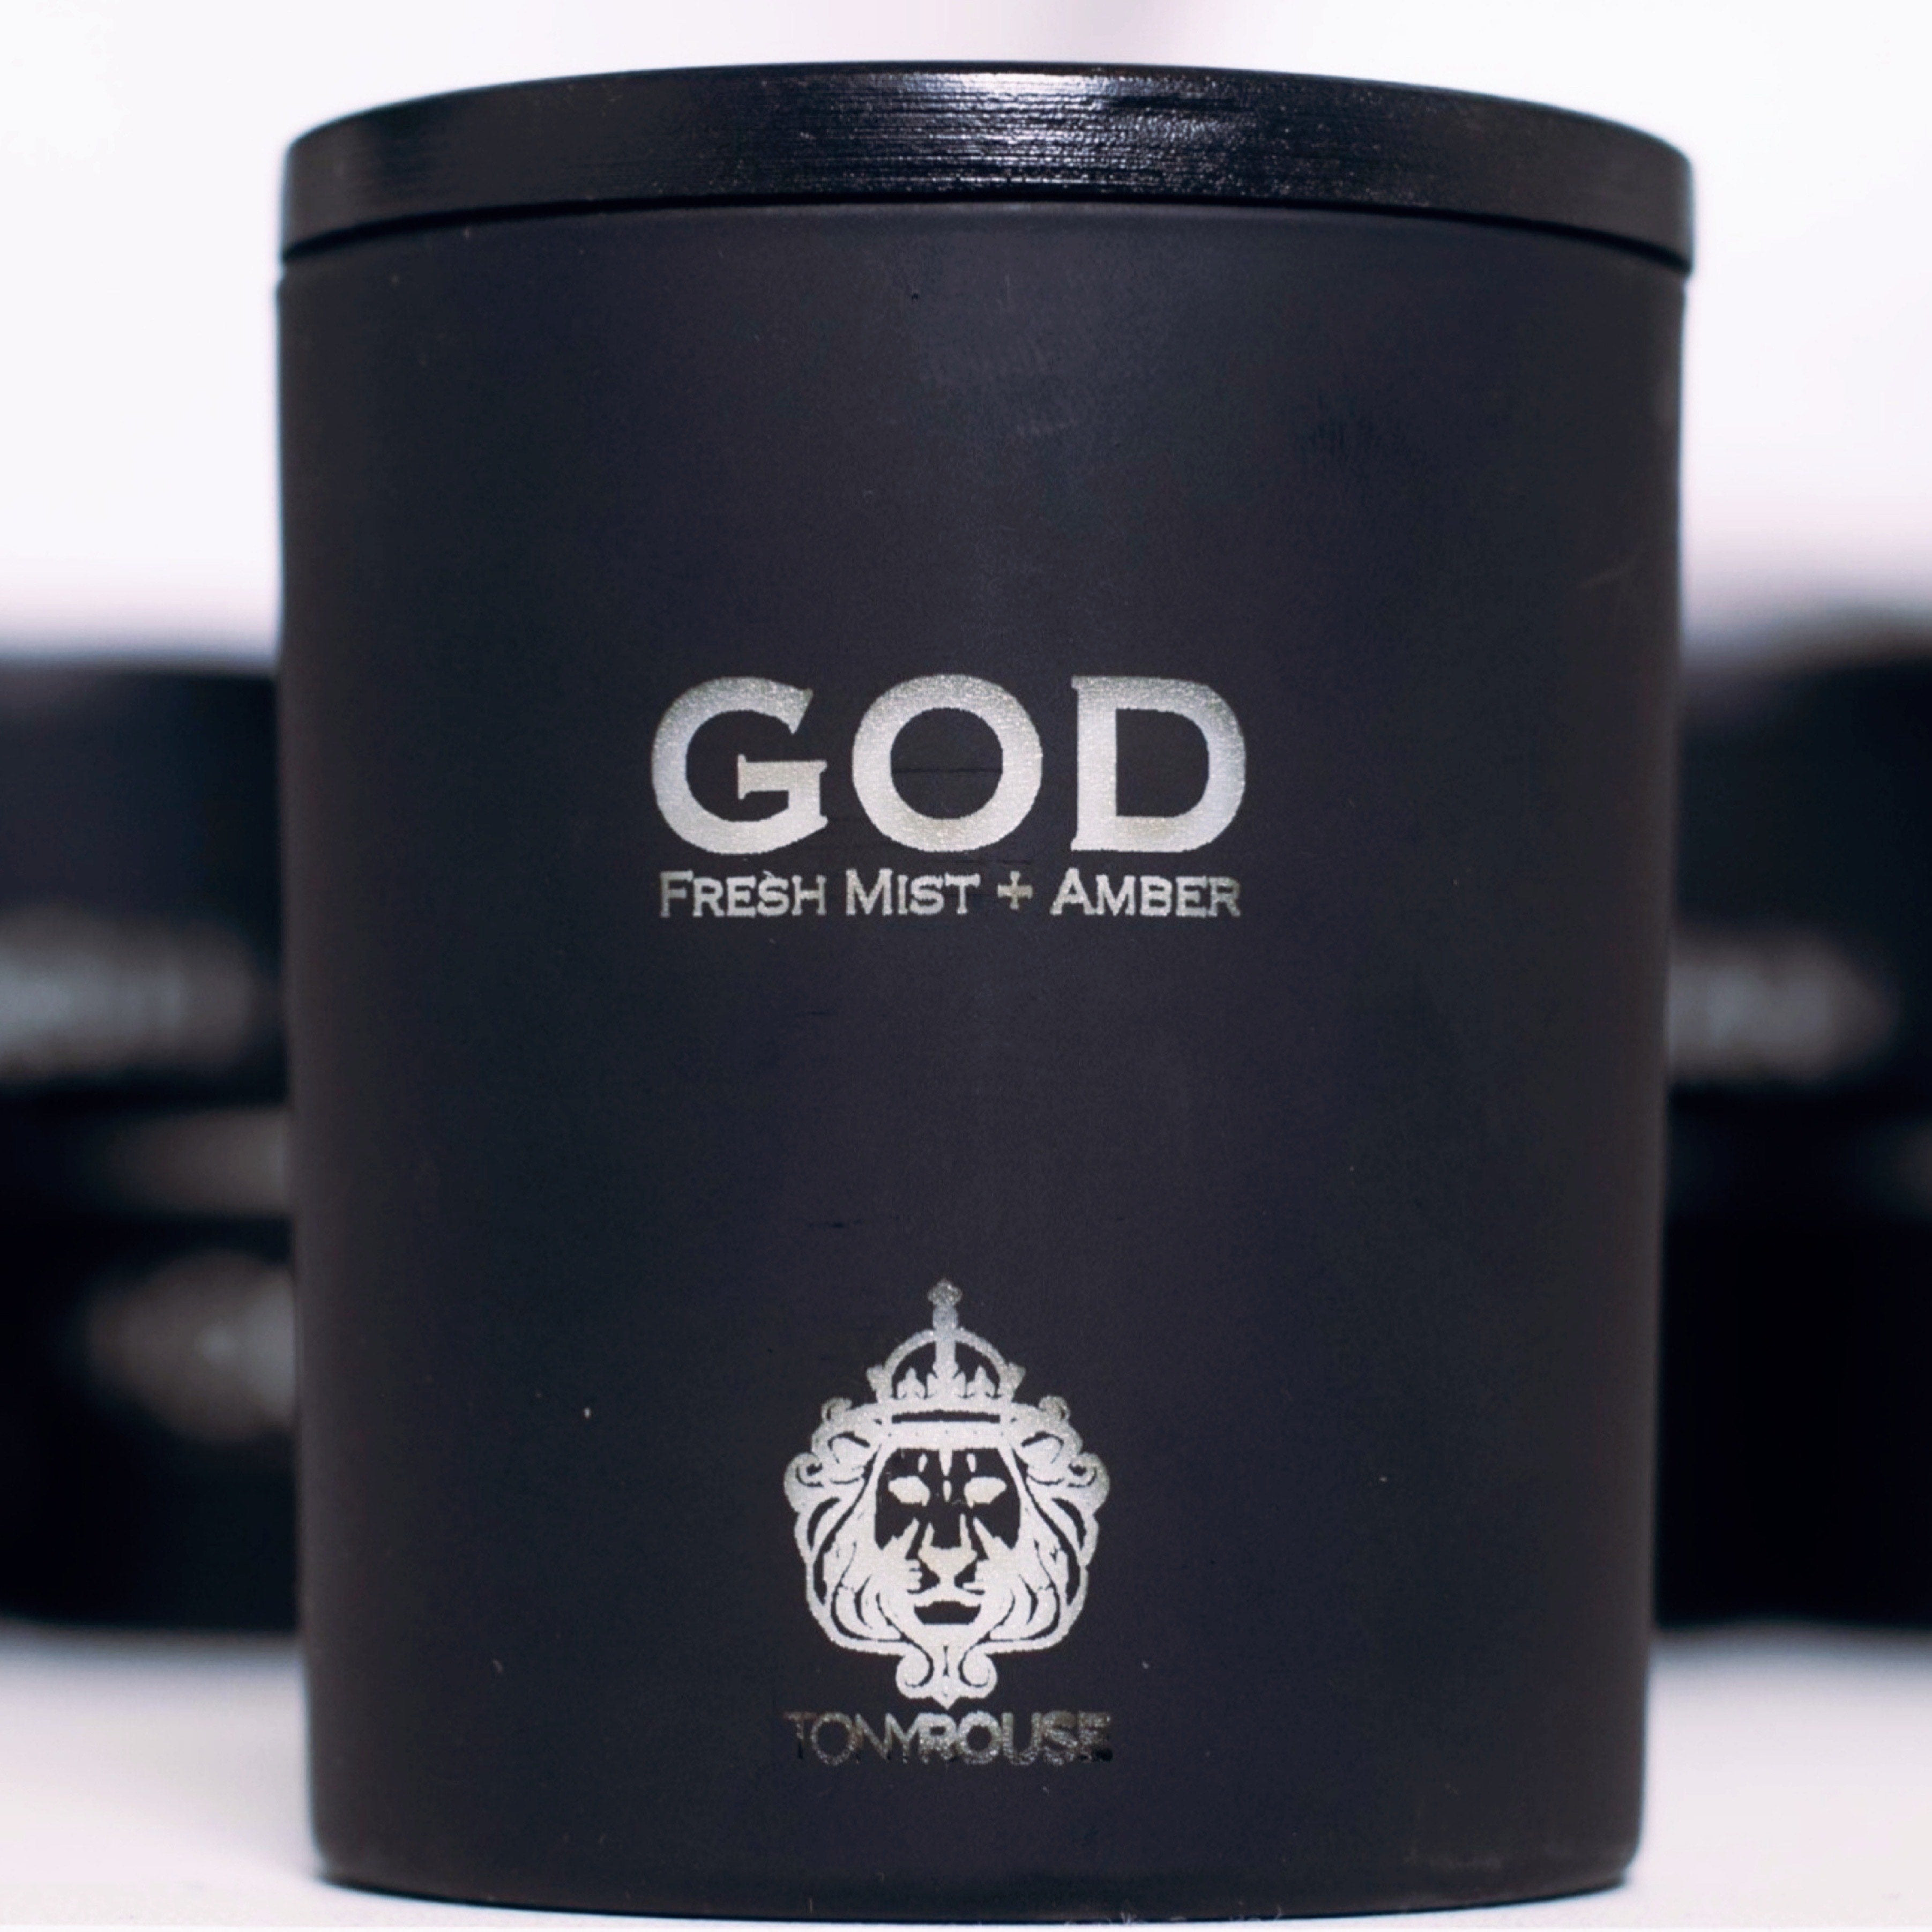 You Named a Candle, 'GOD'???